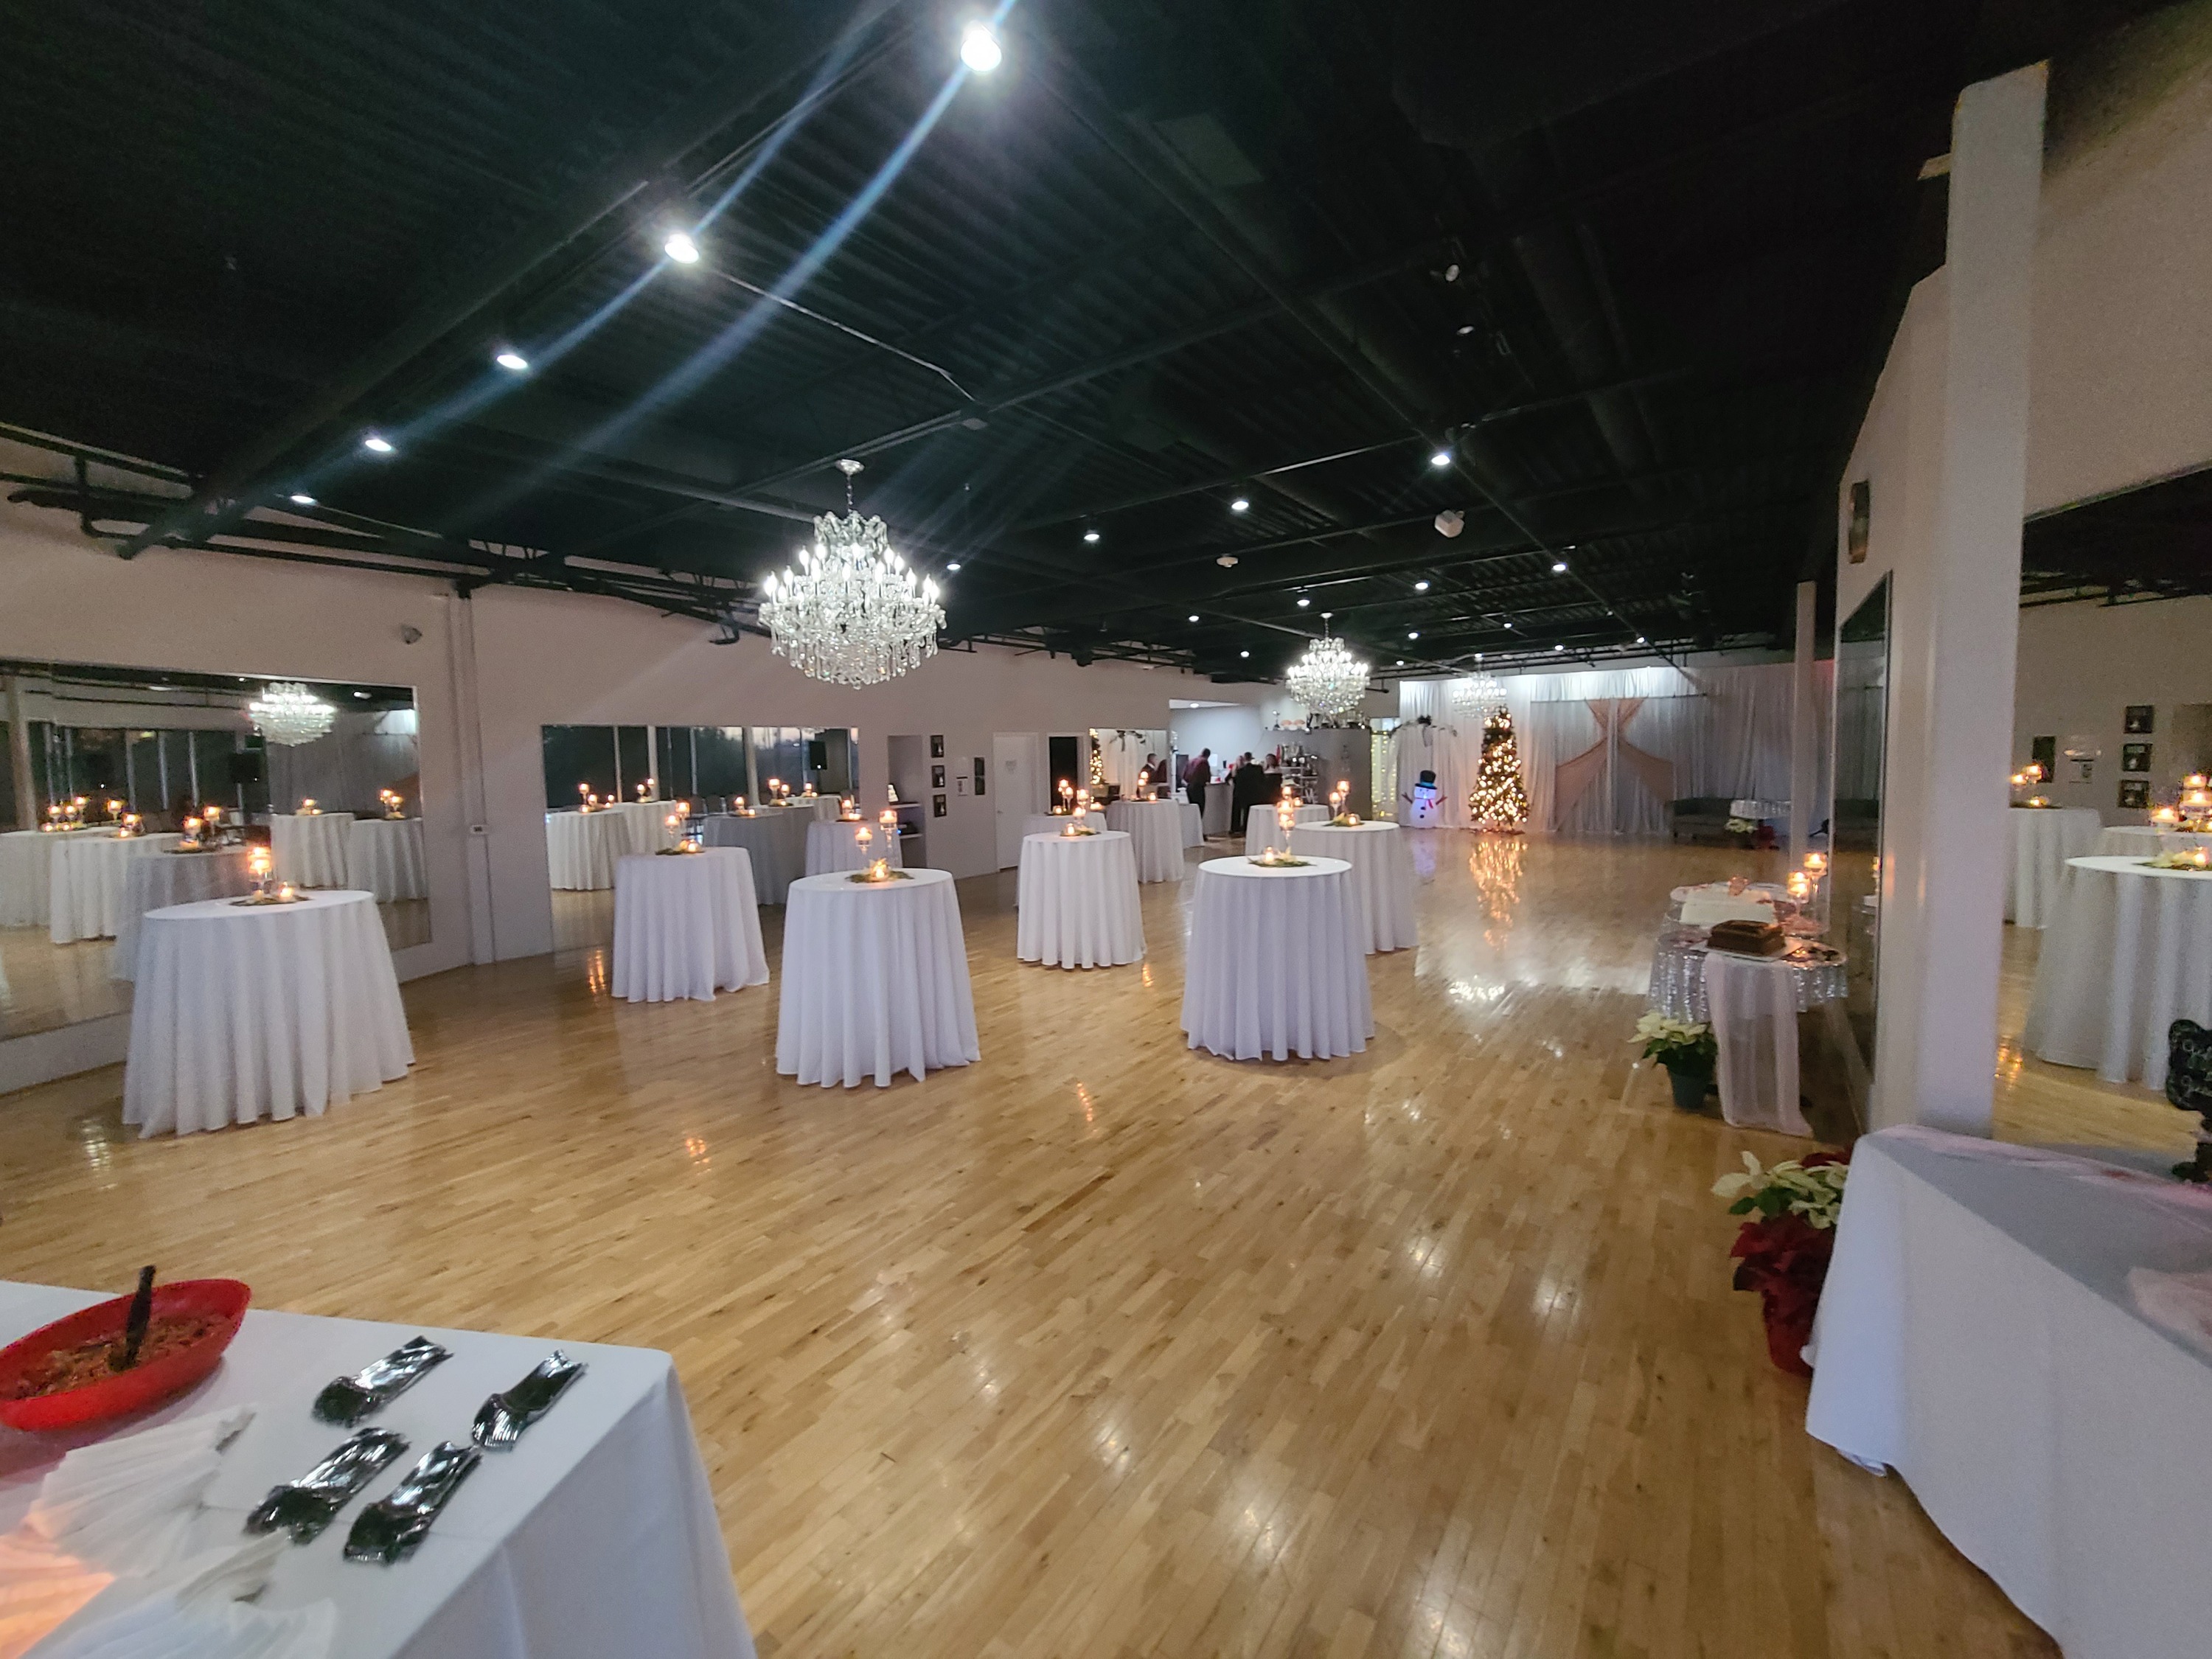   Affordable Options for Table Rentals Cypress TX Can’t Get Enough Of